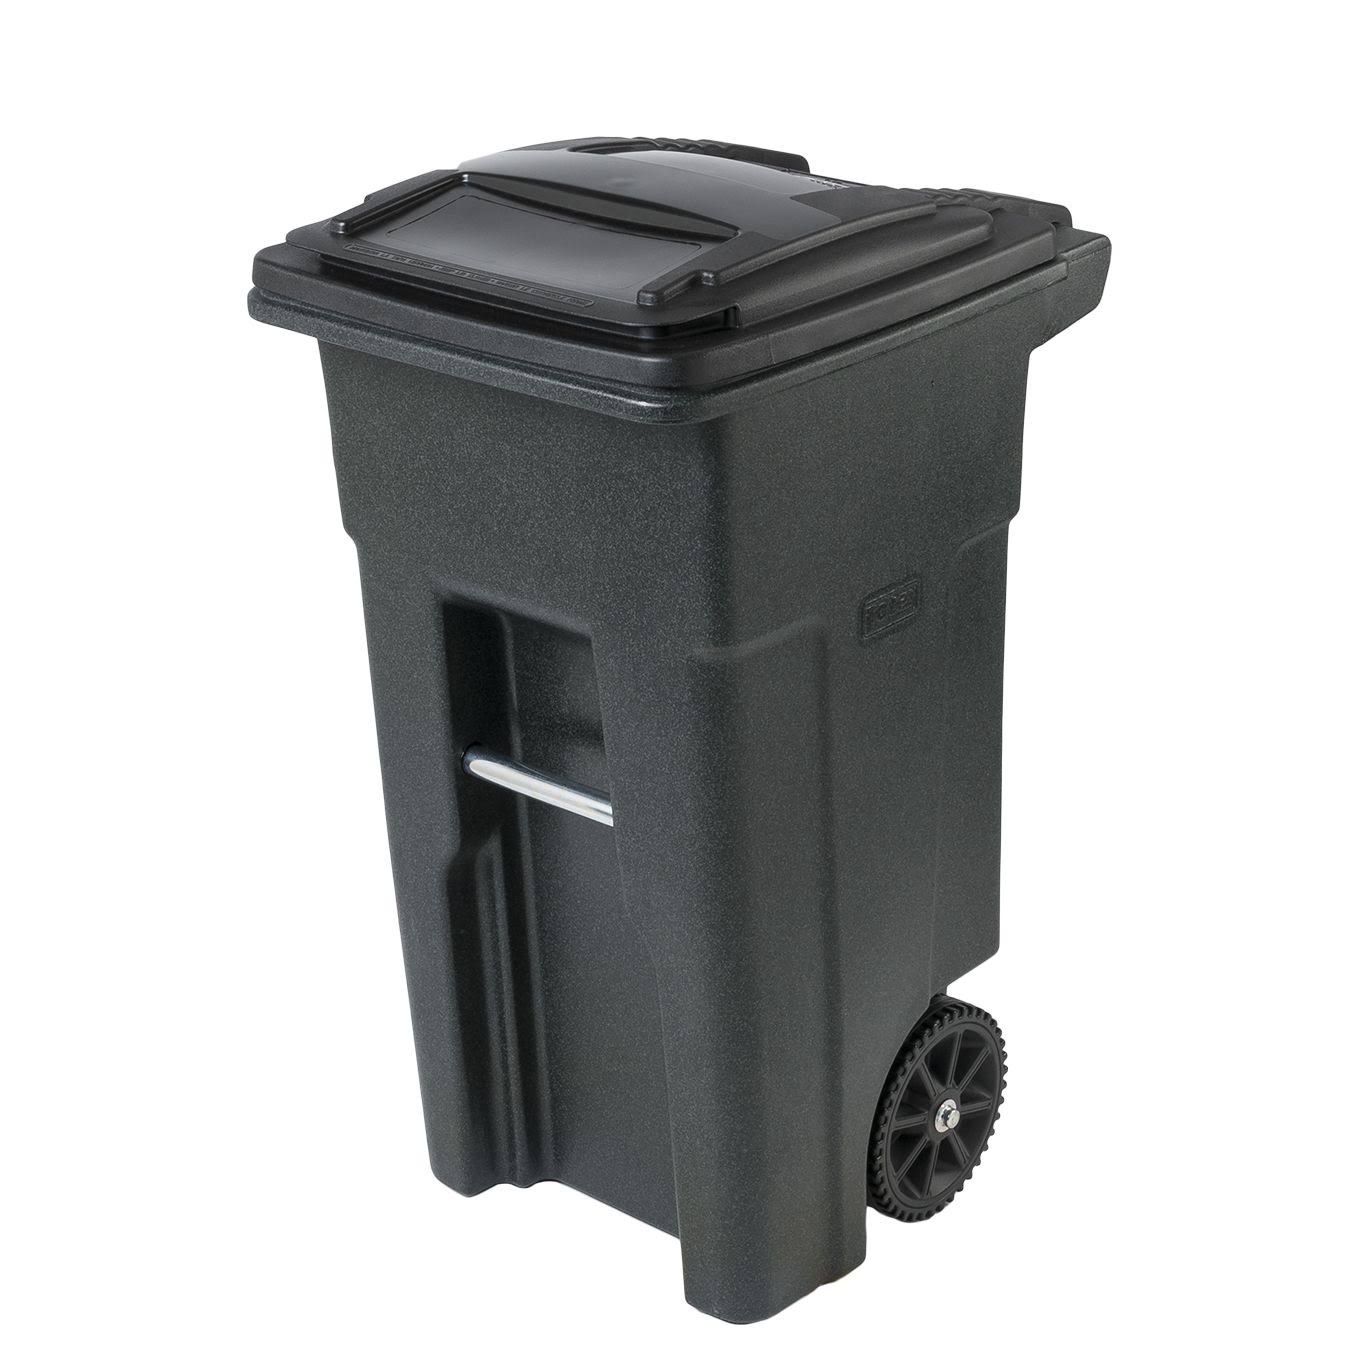 Toter Residential Heavy Duty Trash Can - Greenstone, 32gal